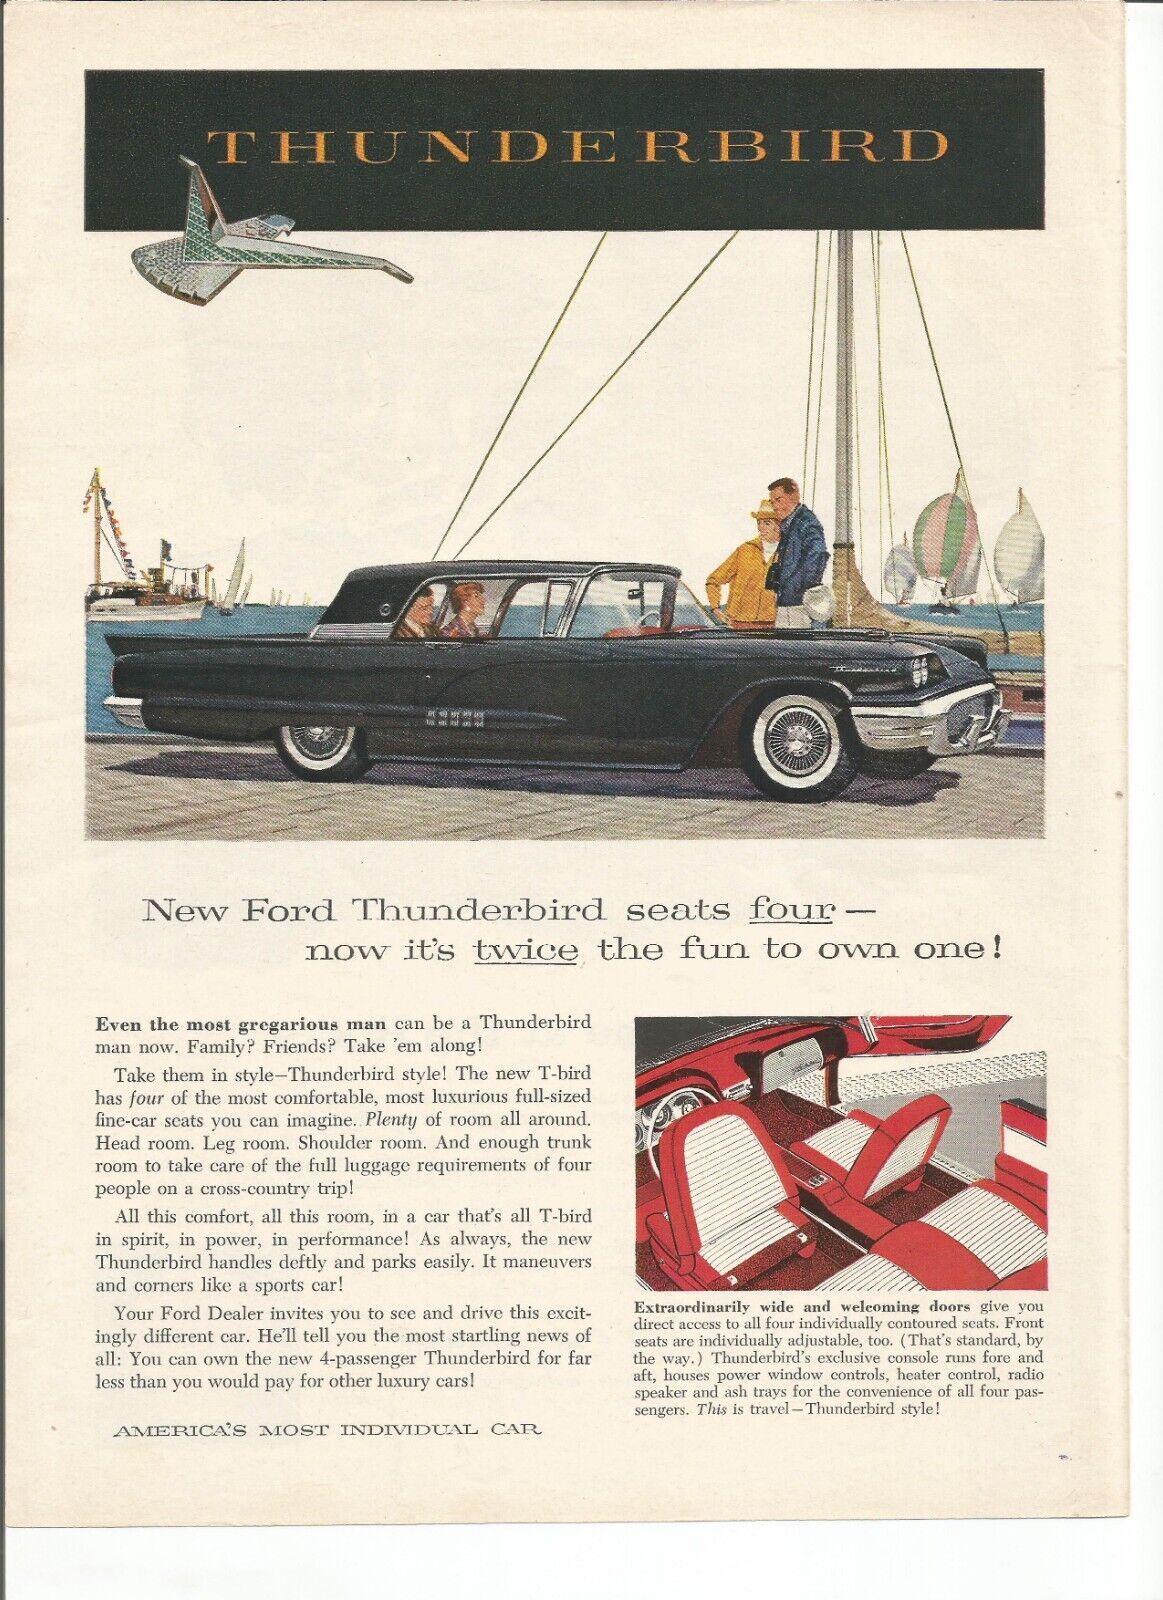 2 Original 1958 Ford Thunderbird Coupe or Convertible vintage print ad (ads)